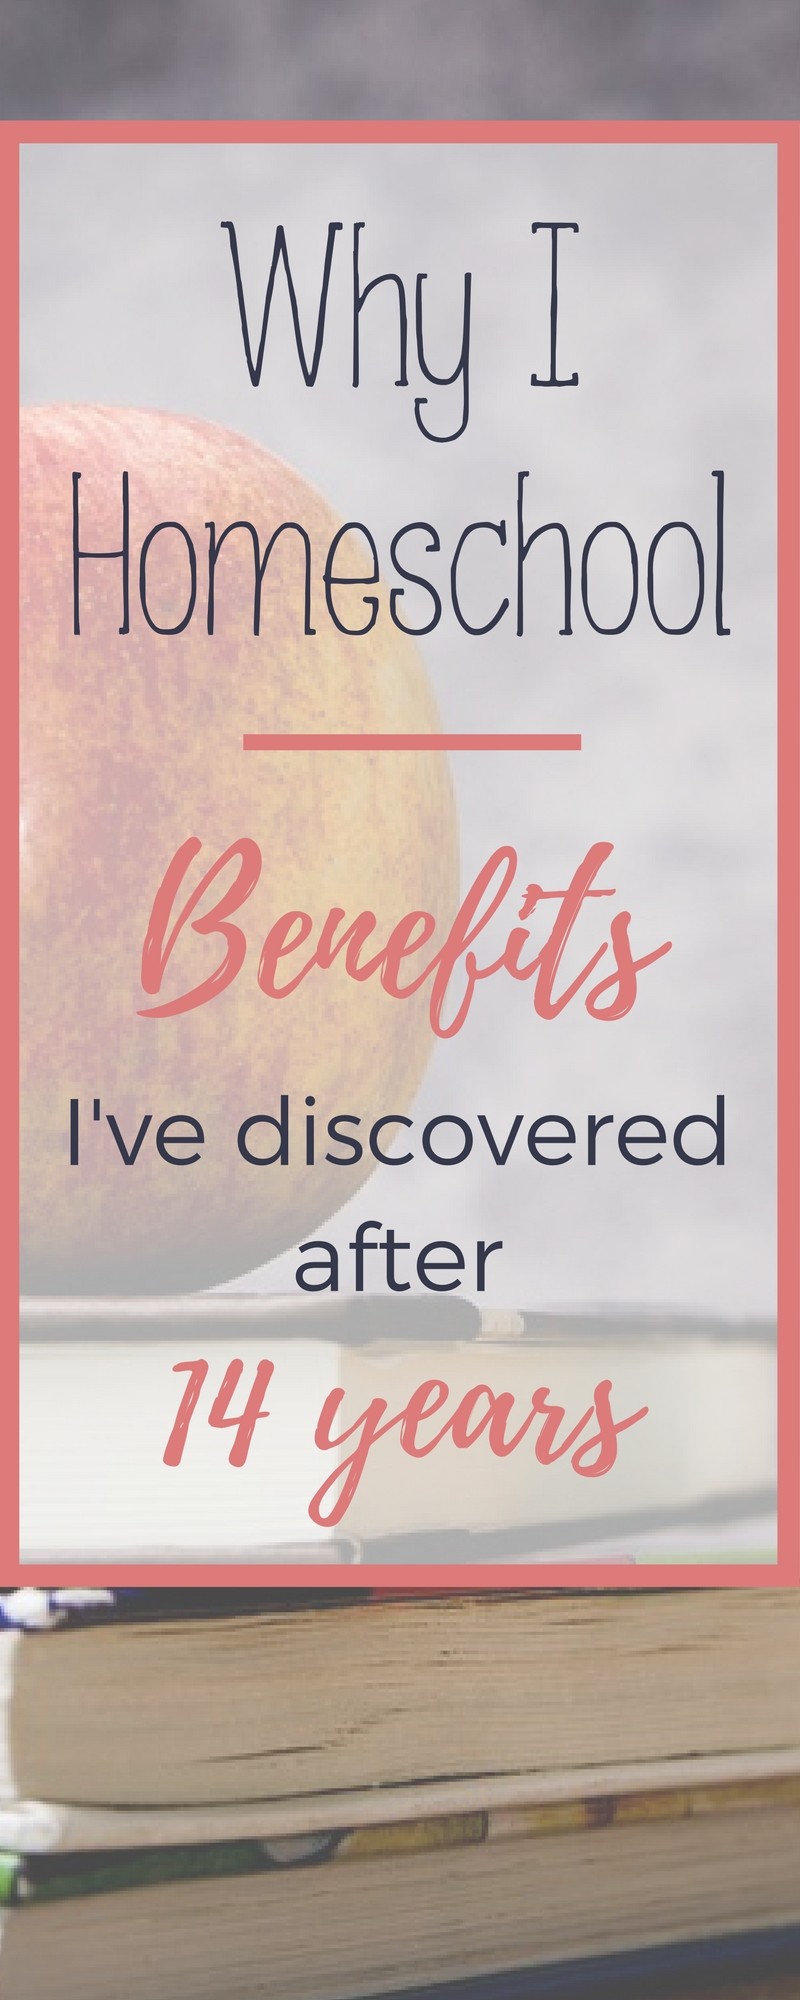 There are many reasons why I homeschool. After 14 years and 6 kids, some of the reasons to homeschool have changed--there are benefits I never imagined.